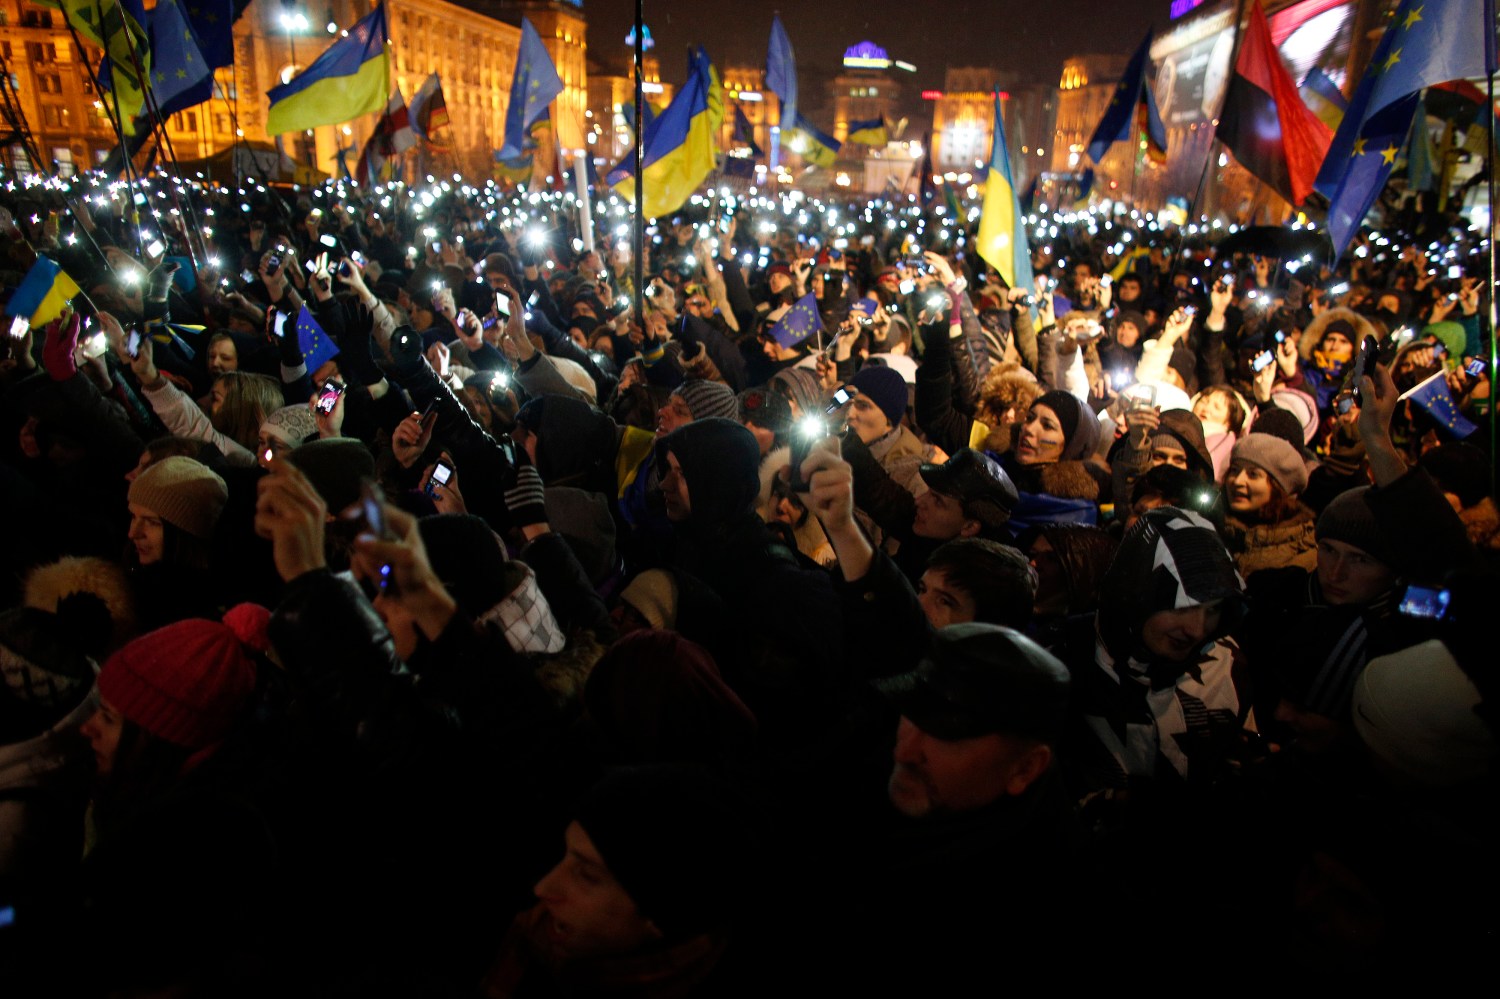 Protesters hold up their mobile phones during a demonstration in support of the EU integration at Independence Square in Kiev November 28, 2013. The European Union told Ukraine it was risking its economic future by rejecting a free-trade deal in favour of closer ties with Russia, hours before a likely frosty encounter on Thursday evening between EU leaders and President Viktor Yanukovich. REUTERS/Stoyan Nenov